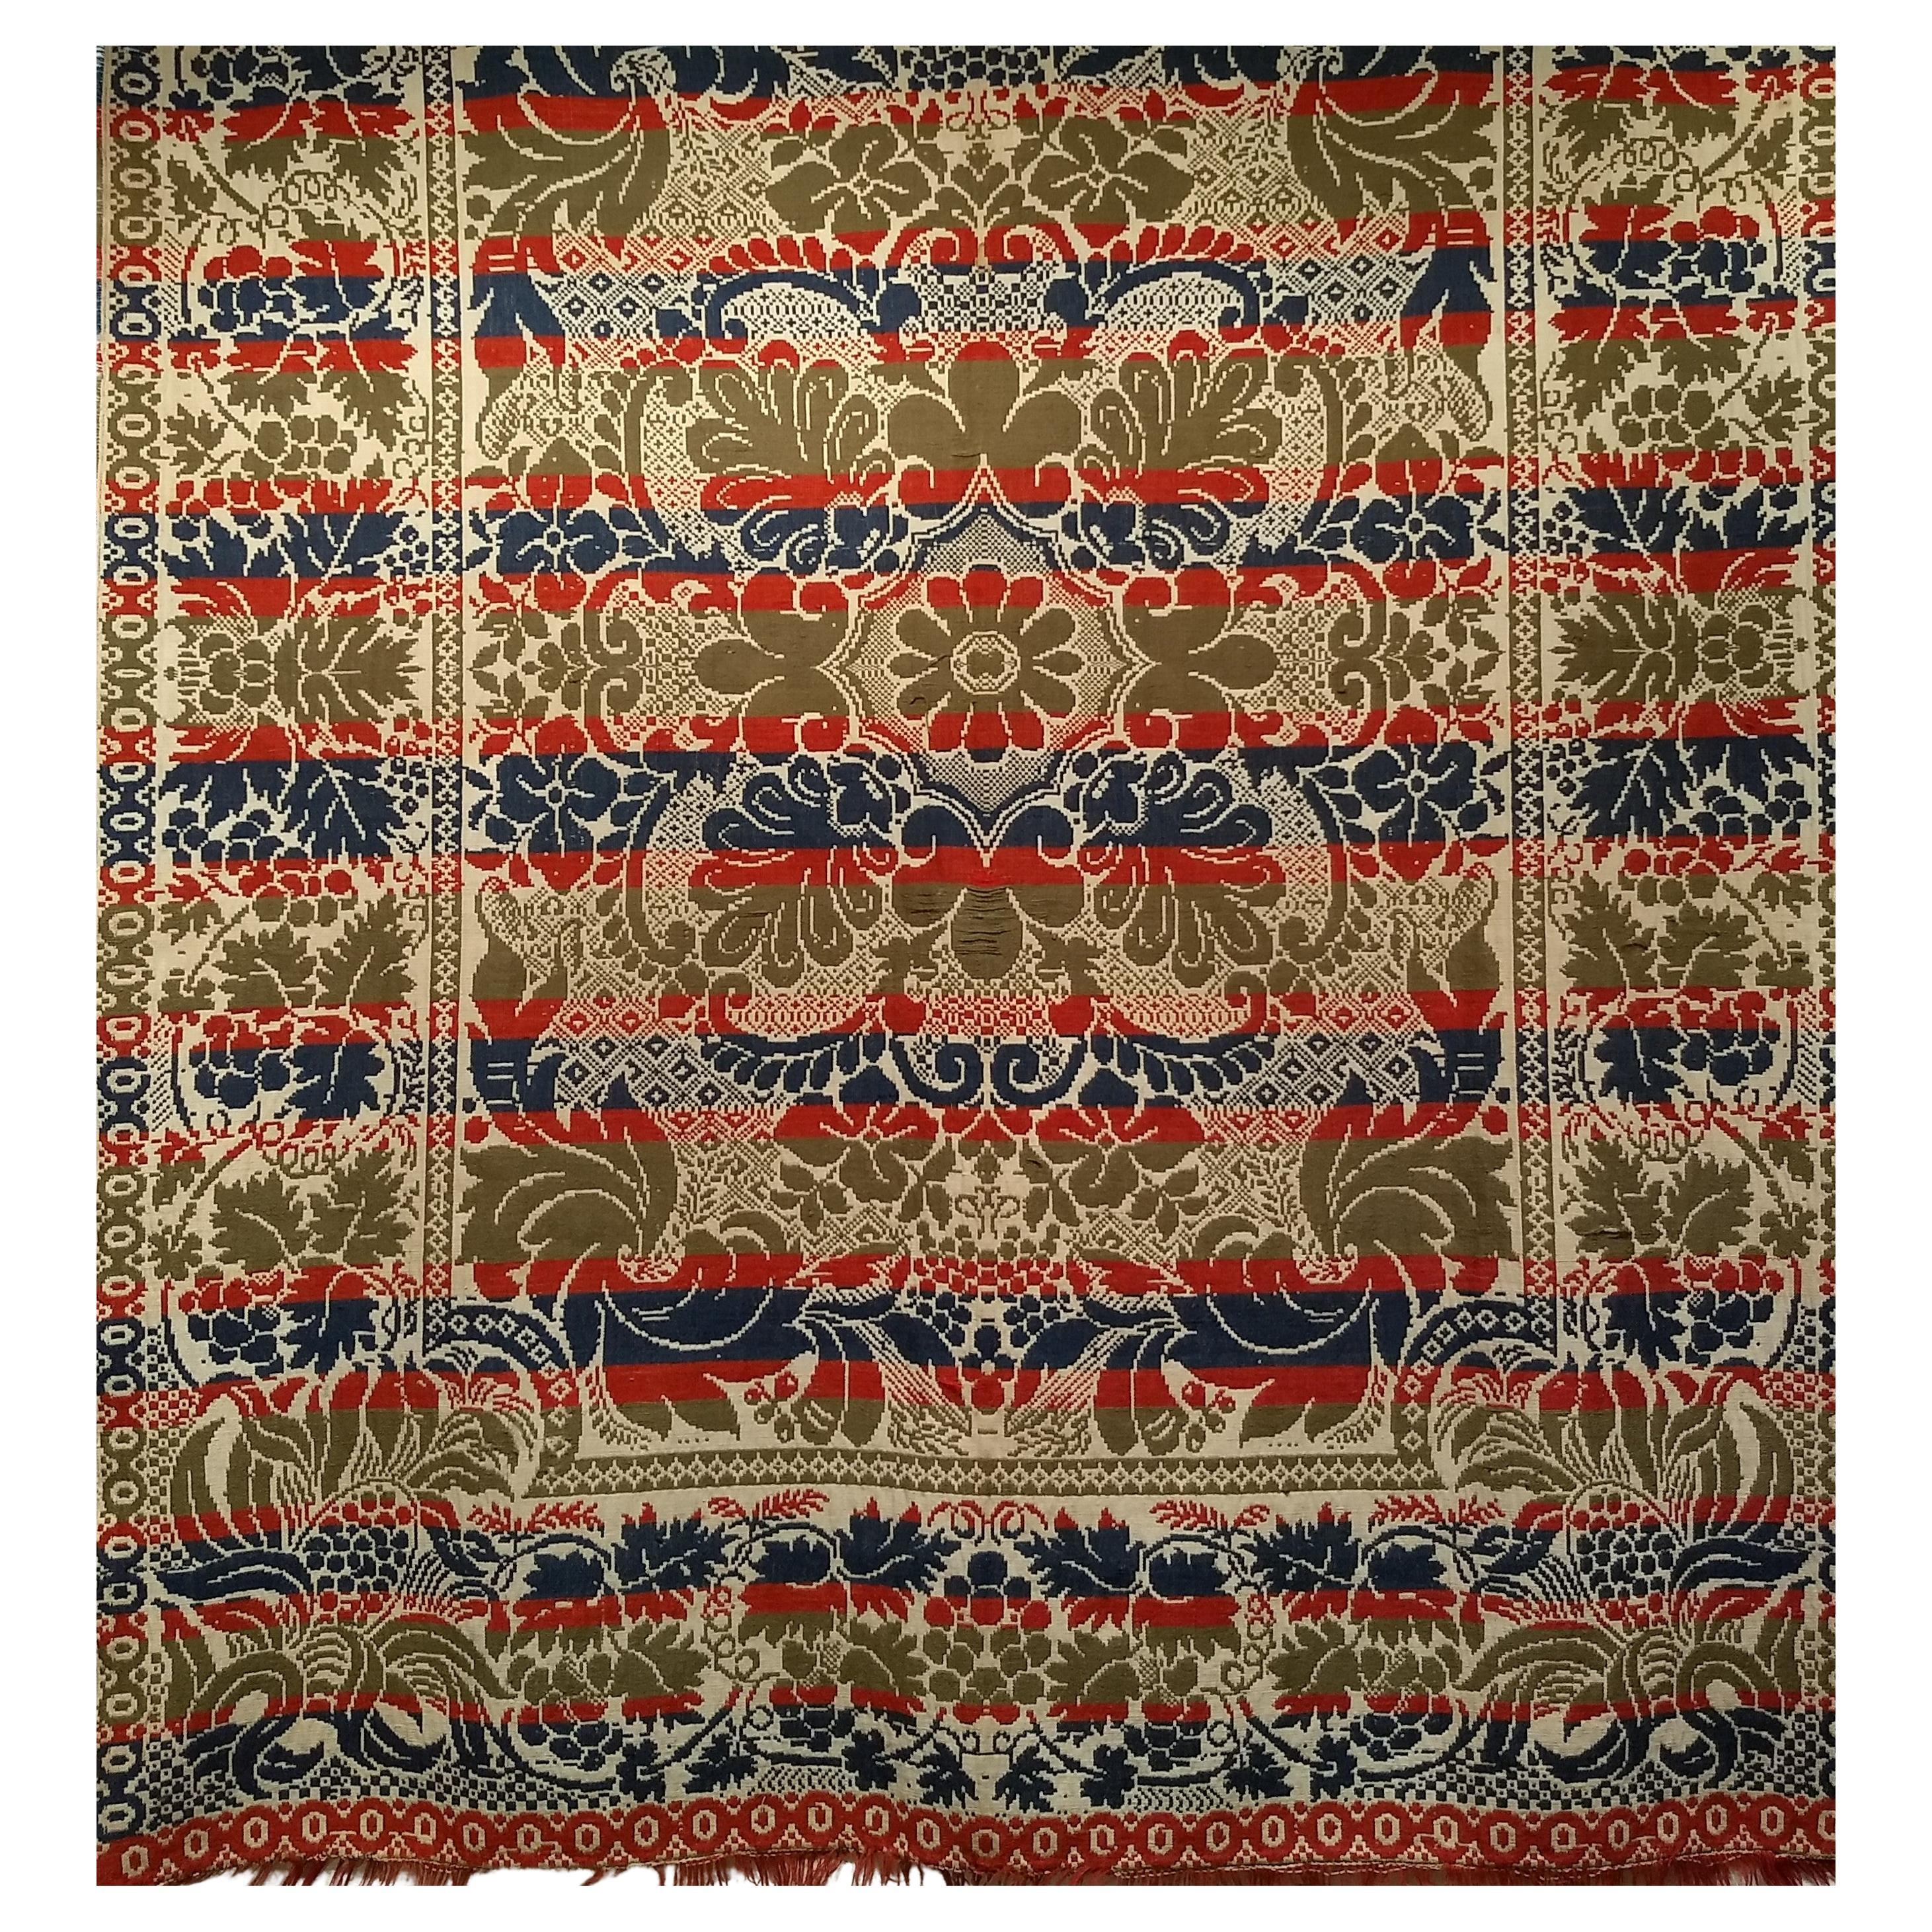 19th Century American Hand-Woven Four Color Coverlet in Red, Navy, Green, Ivory For Sale